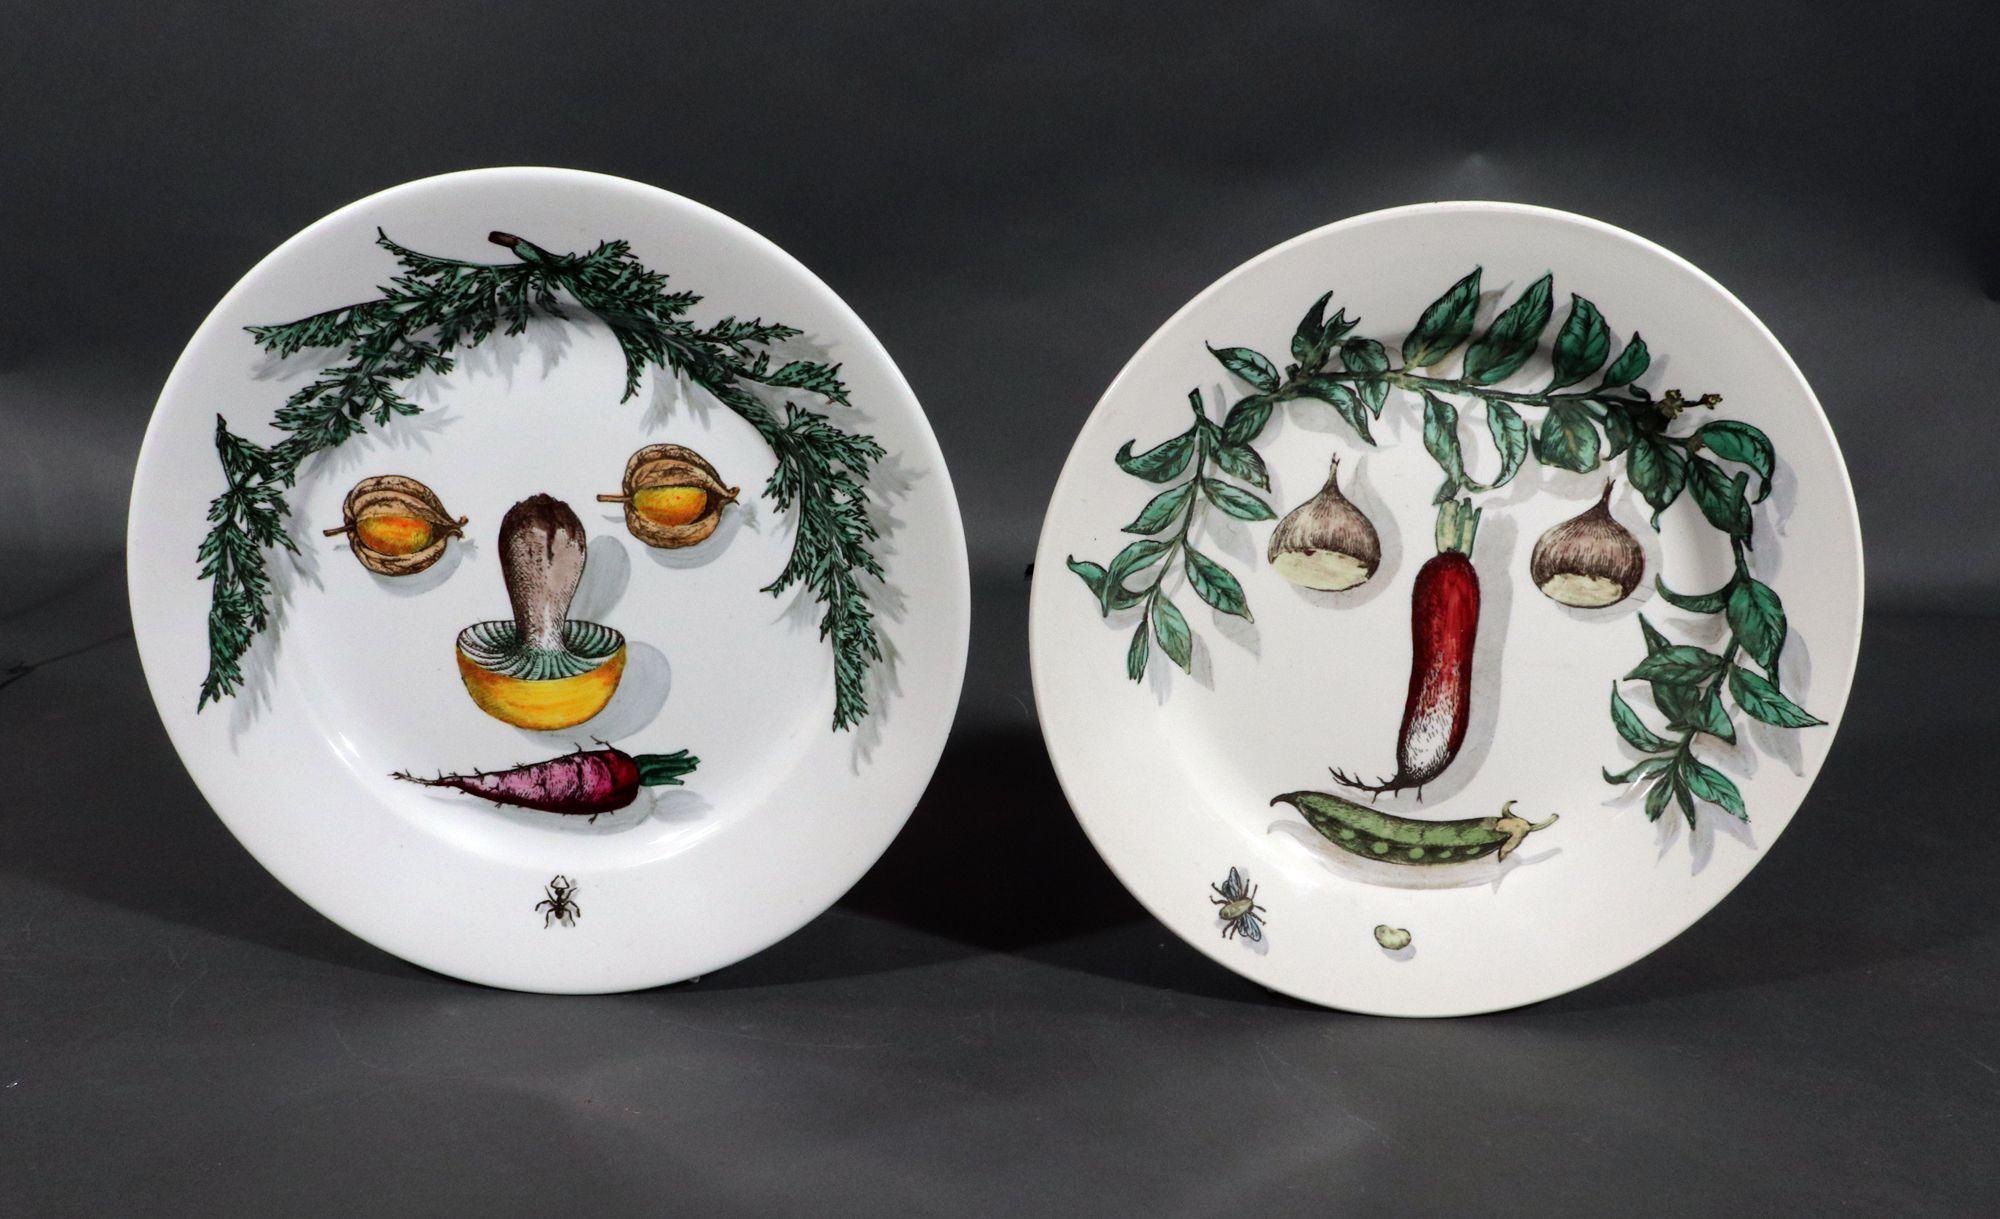 Piero Fornasetti Pottery Arcimboldesca Vegetable Face Plates,
After Giuseppe Arcimboldo,
 A Pair,
Circa 1955

The pottery plates are after Giuseppe Arcimboldo- the design of a face creatively designed with the use of various vegetables and plants. 